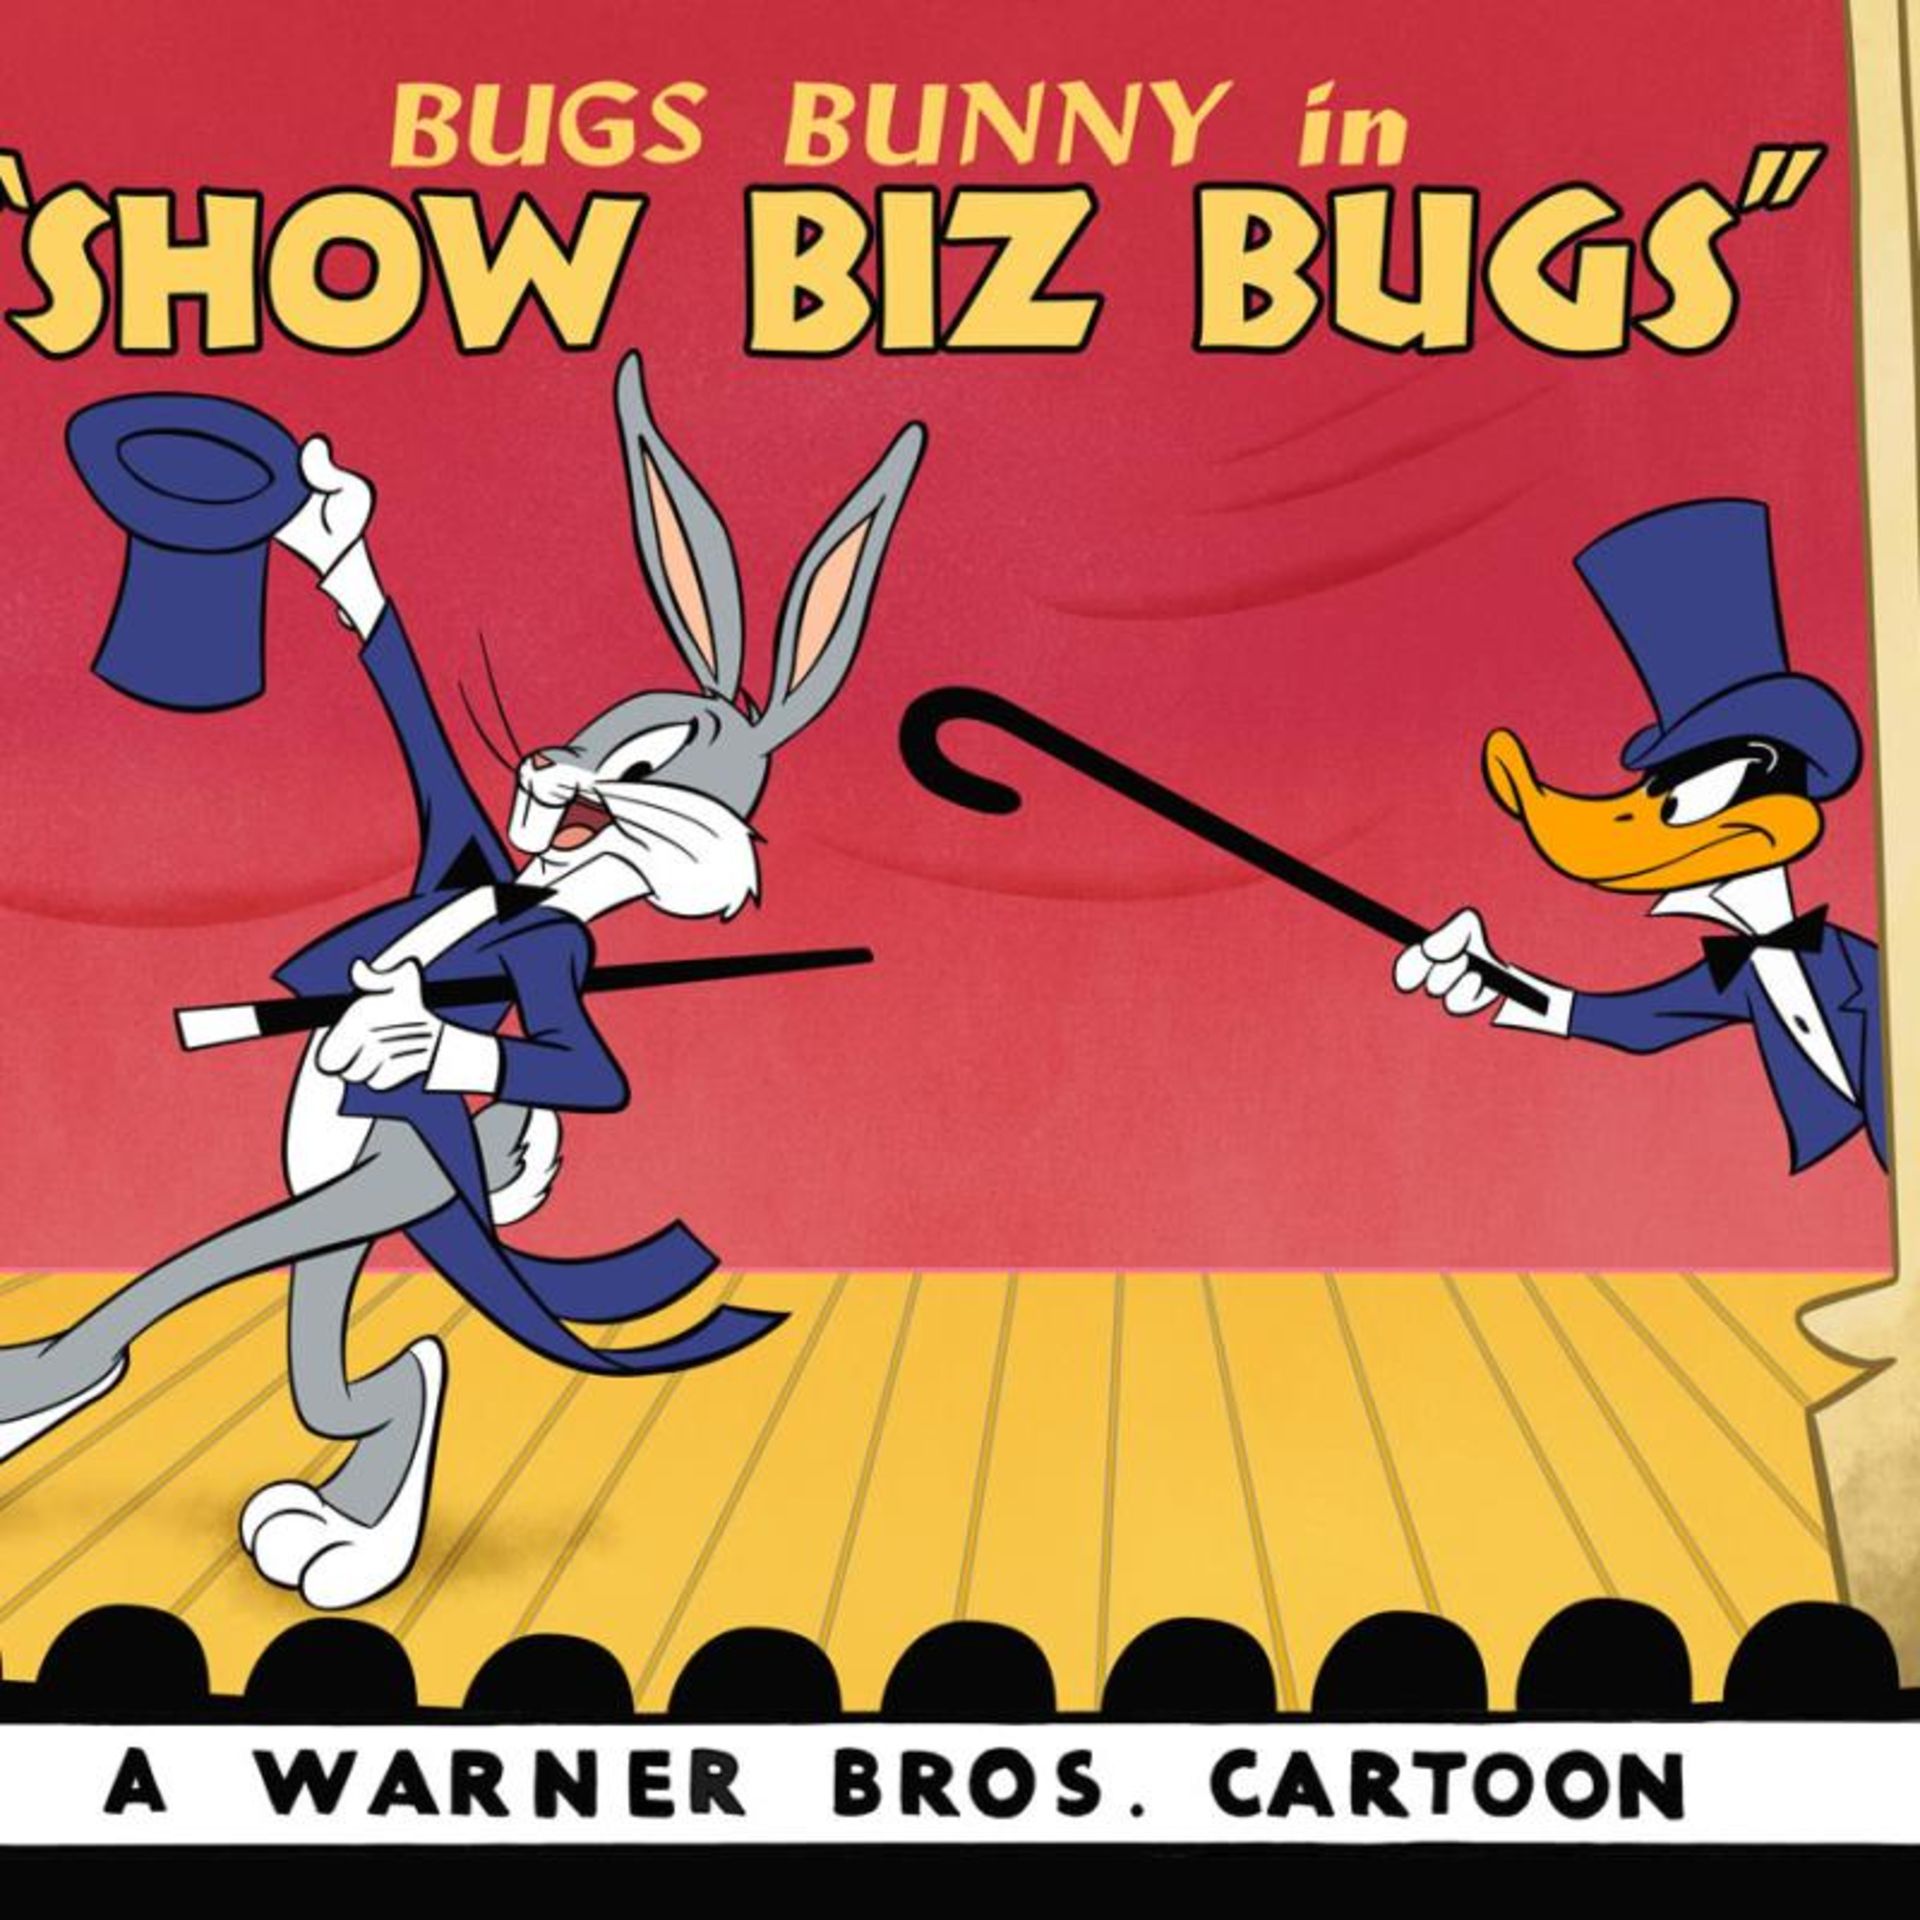 Show Biz Bugs by Looney Tunes - Image 2 of 2